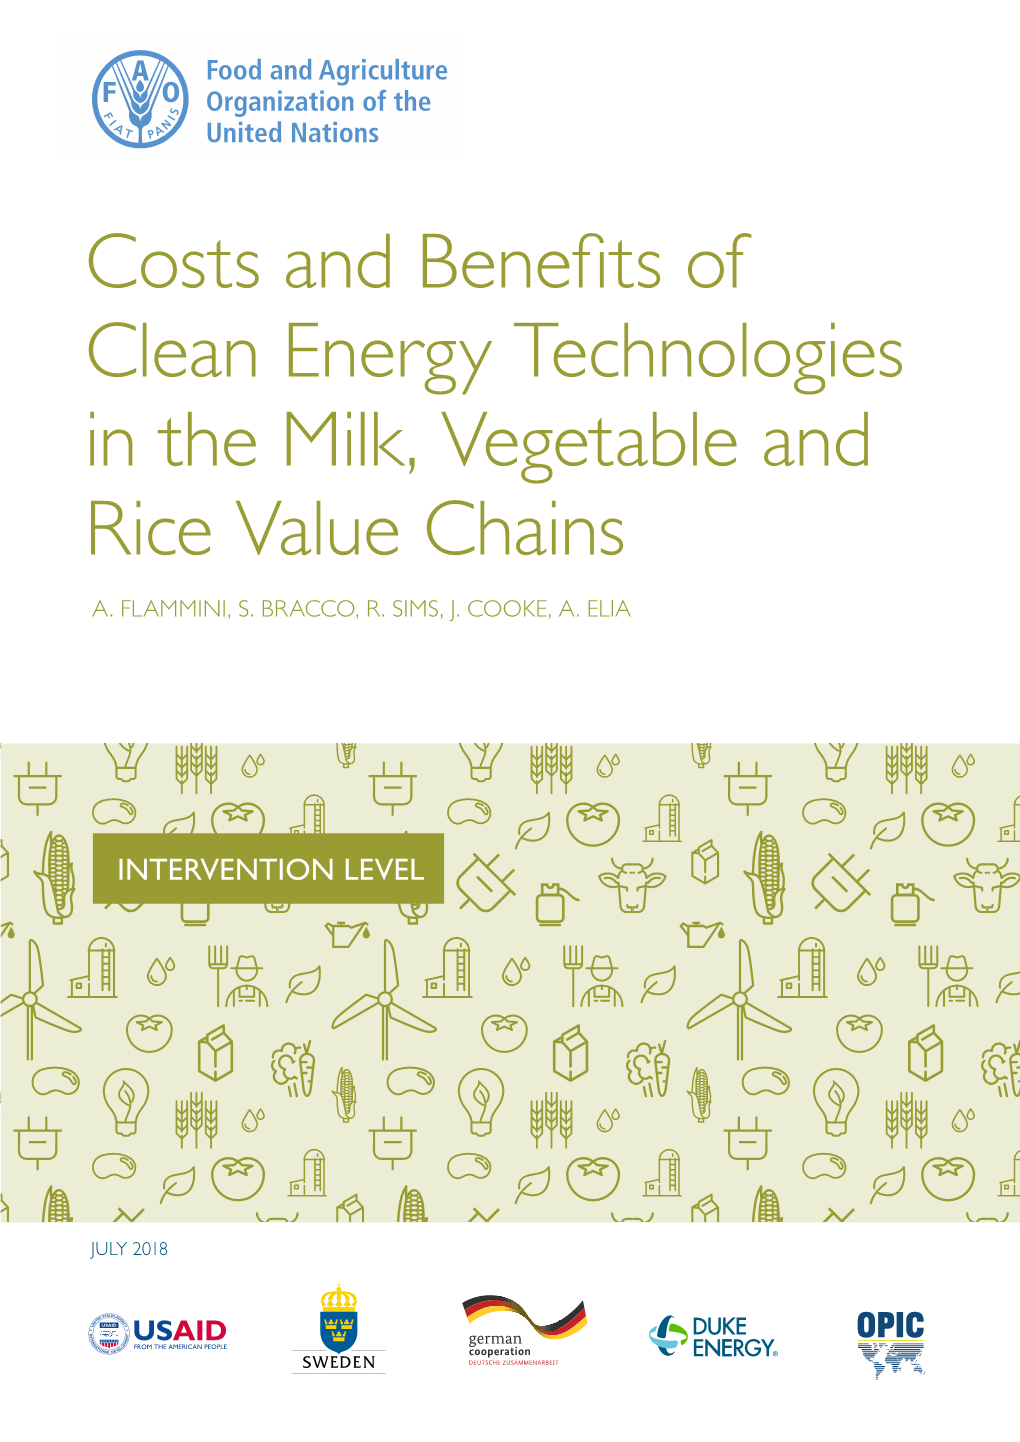 Costs and Benefits of Clean Energy Technologies in the Milk, Vegetable and Rice Value Chains